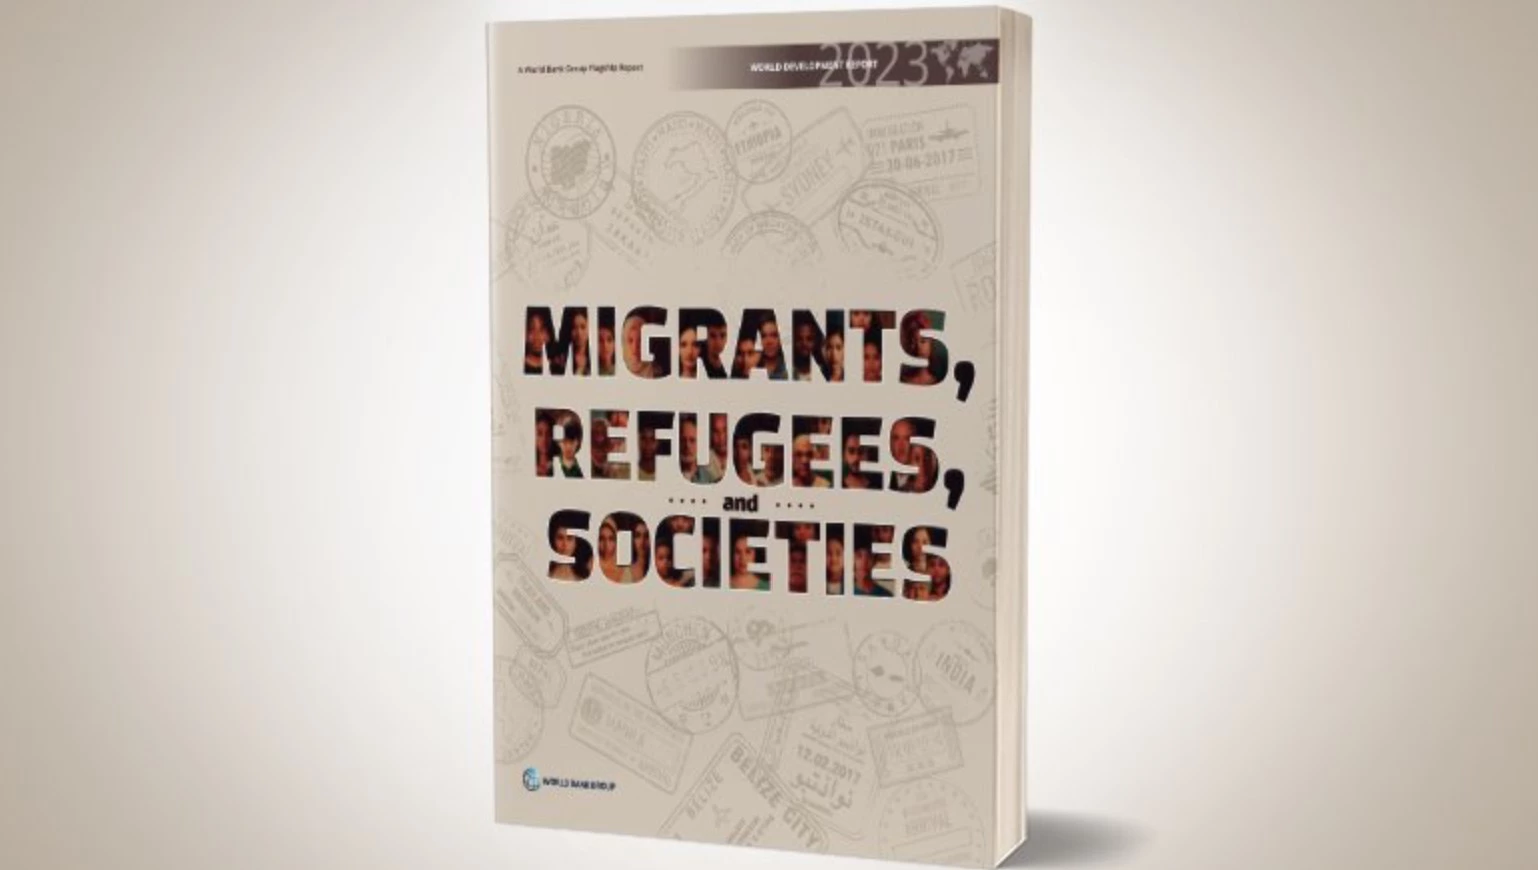 World Development Report 2023: Migrants, Refugees, and Societies. World Bank's book cover